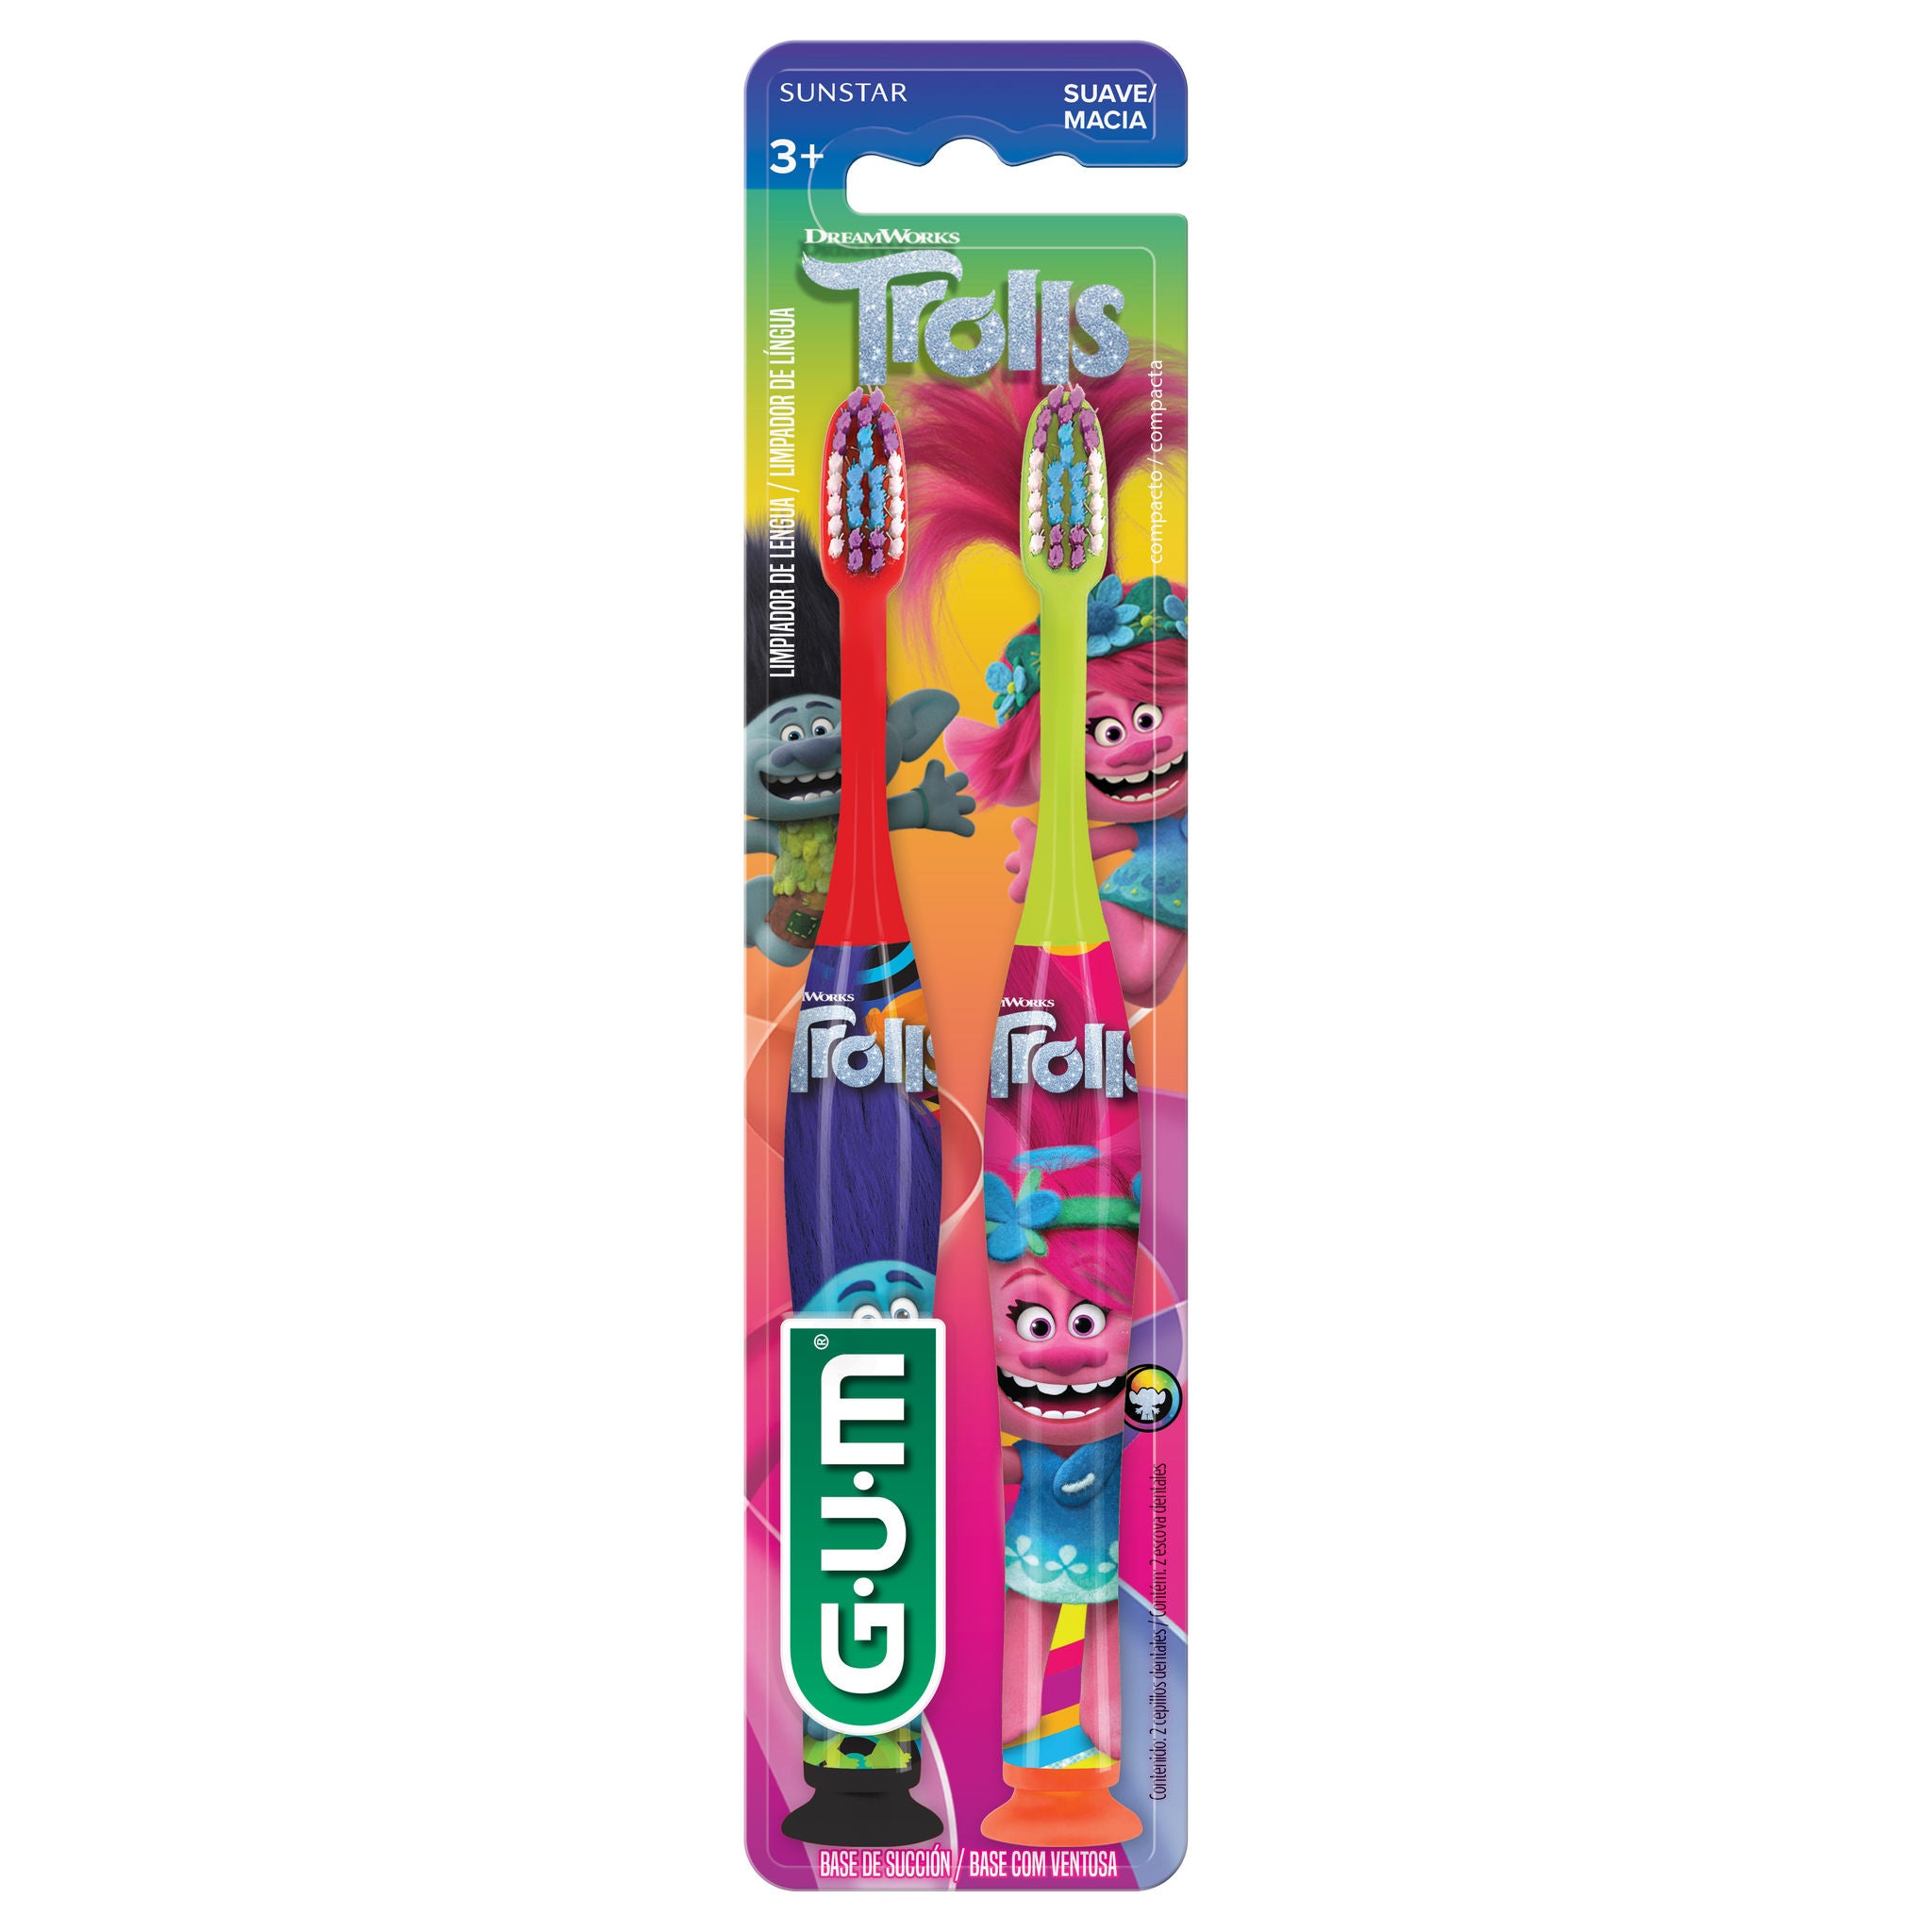 4060TRY-Product-Packaging-Toothbrush-Trolls-front2-2ct.jpg